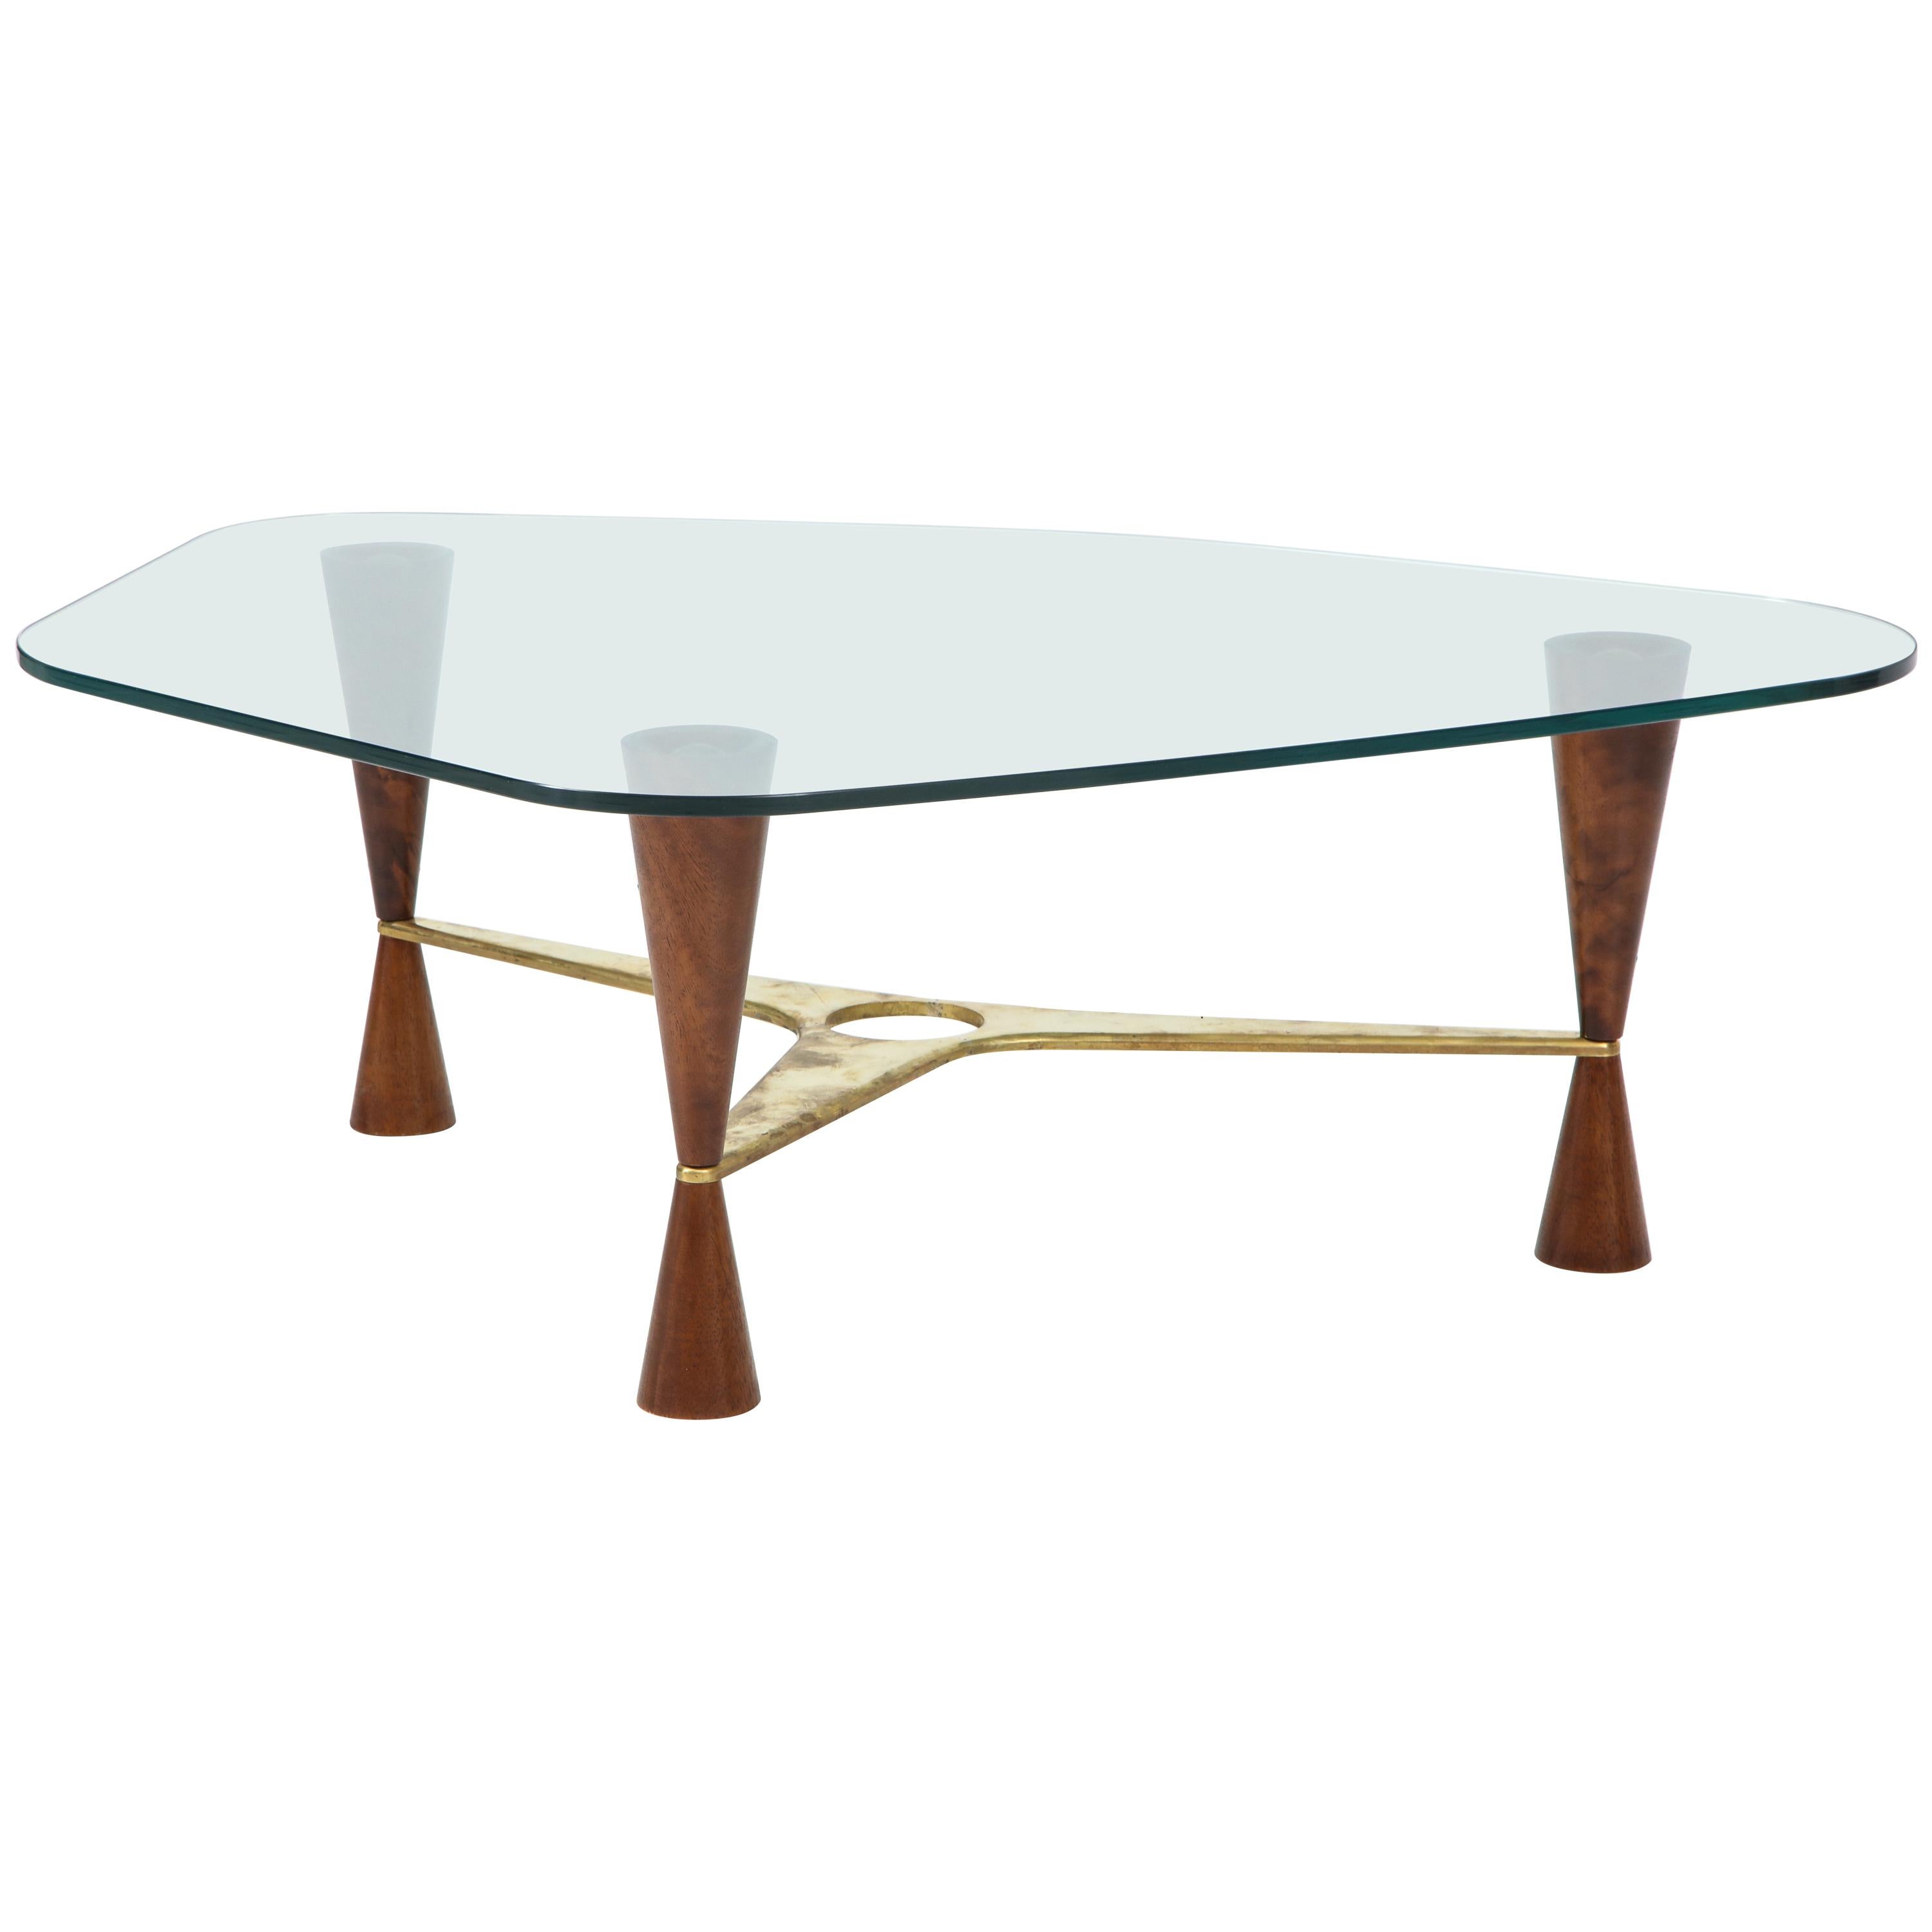 Dunbar Style Walnut, Brass and Glass Shaped Cocktail or Coffee Table